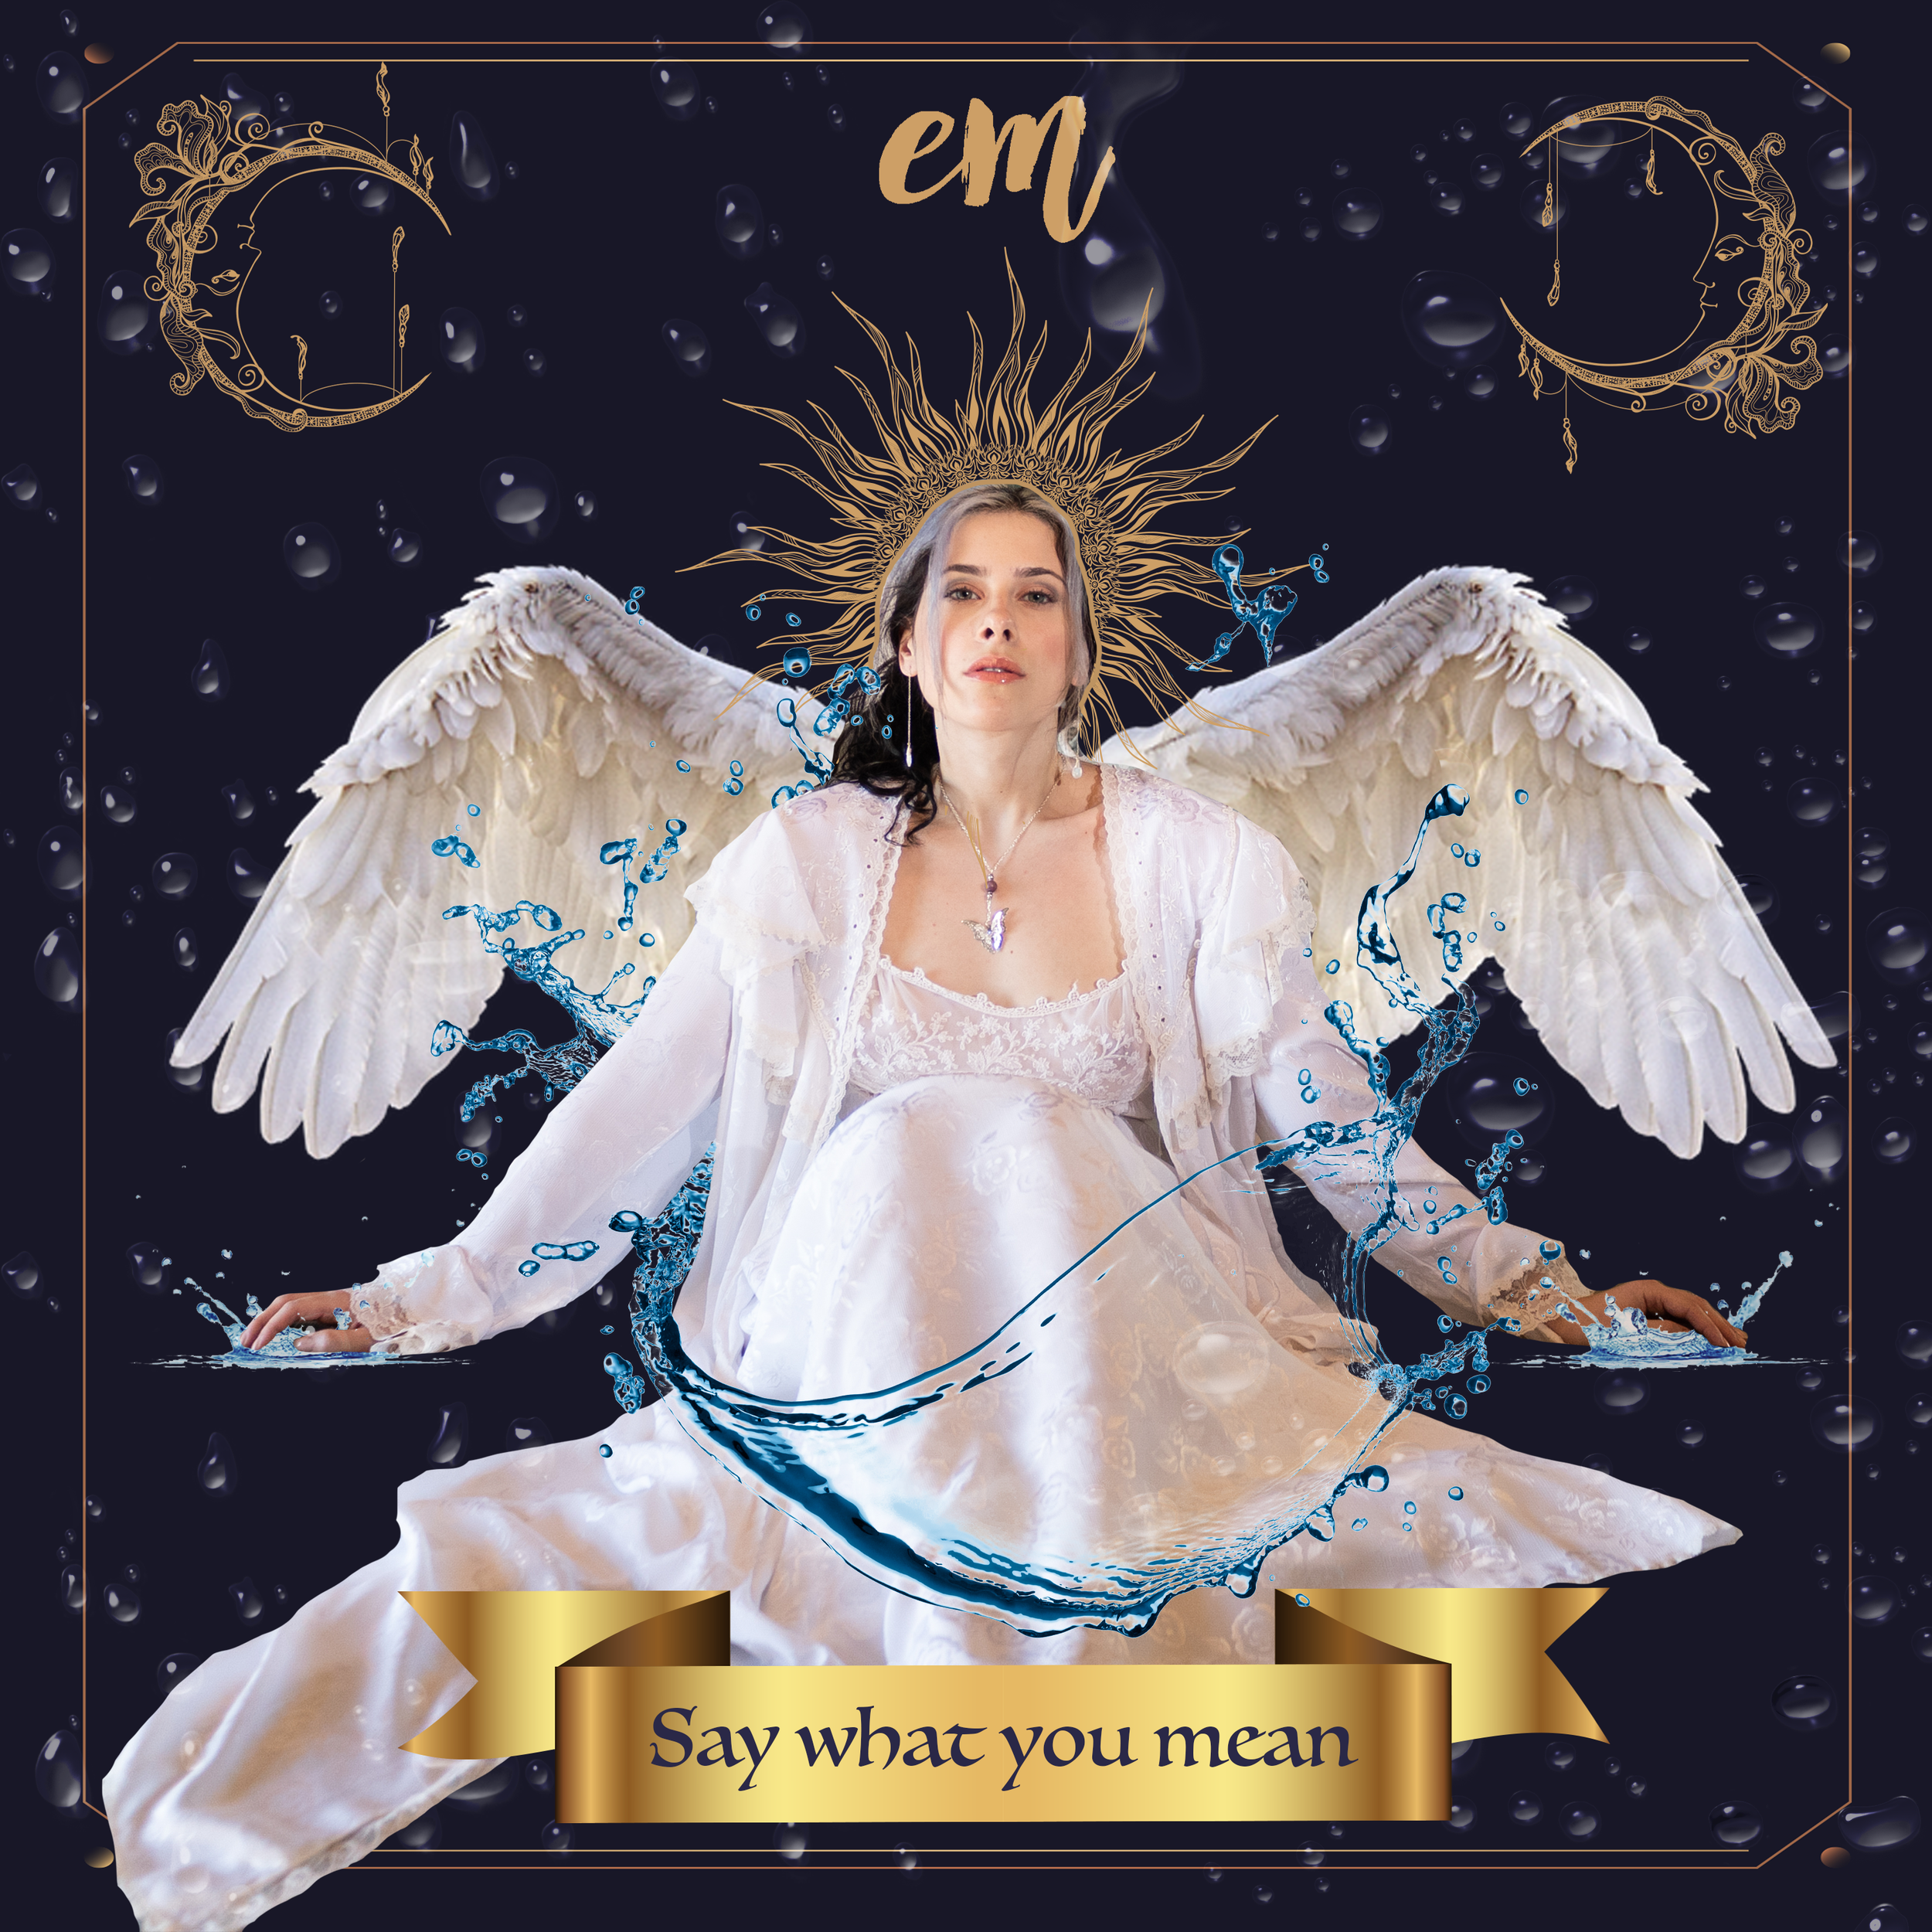 Em Is The Queen Of The Other World – “Say What You Mean”